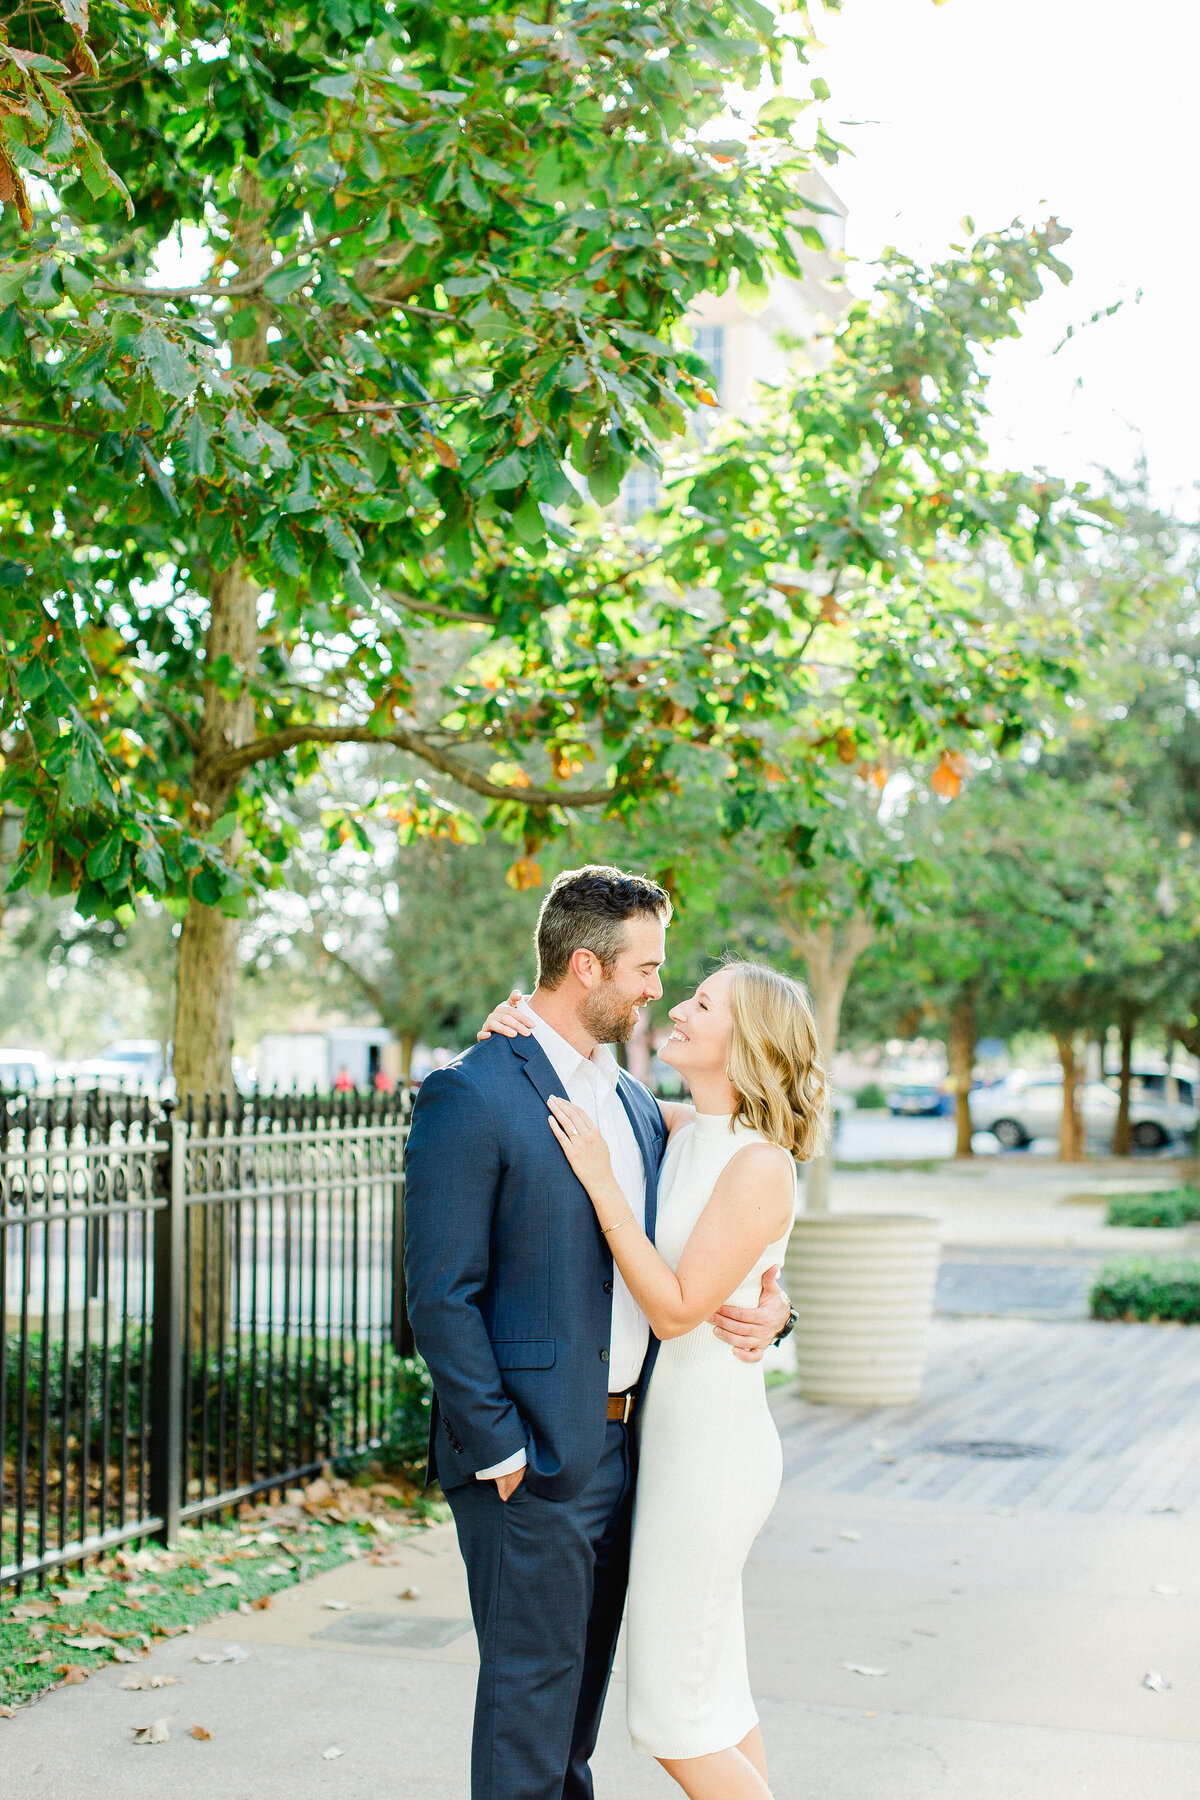 Tampa Wedding Photographer | ©Ailyn La Torre Photography 2020-56083